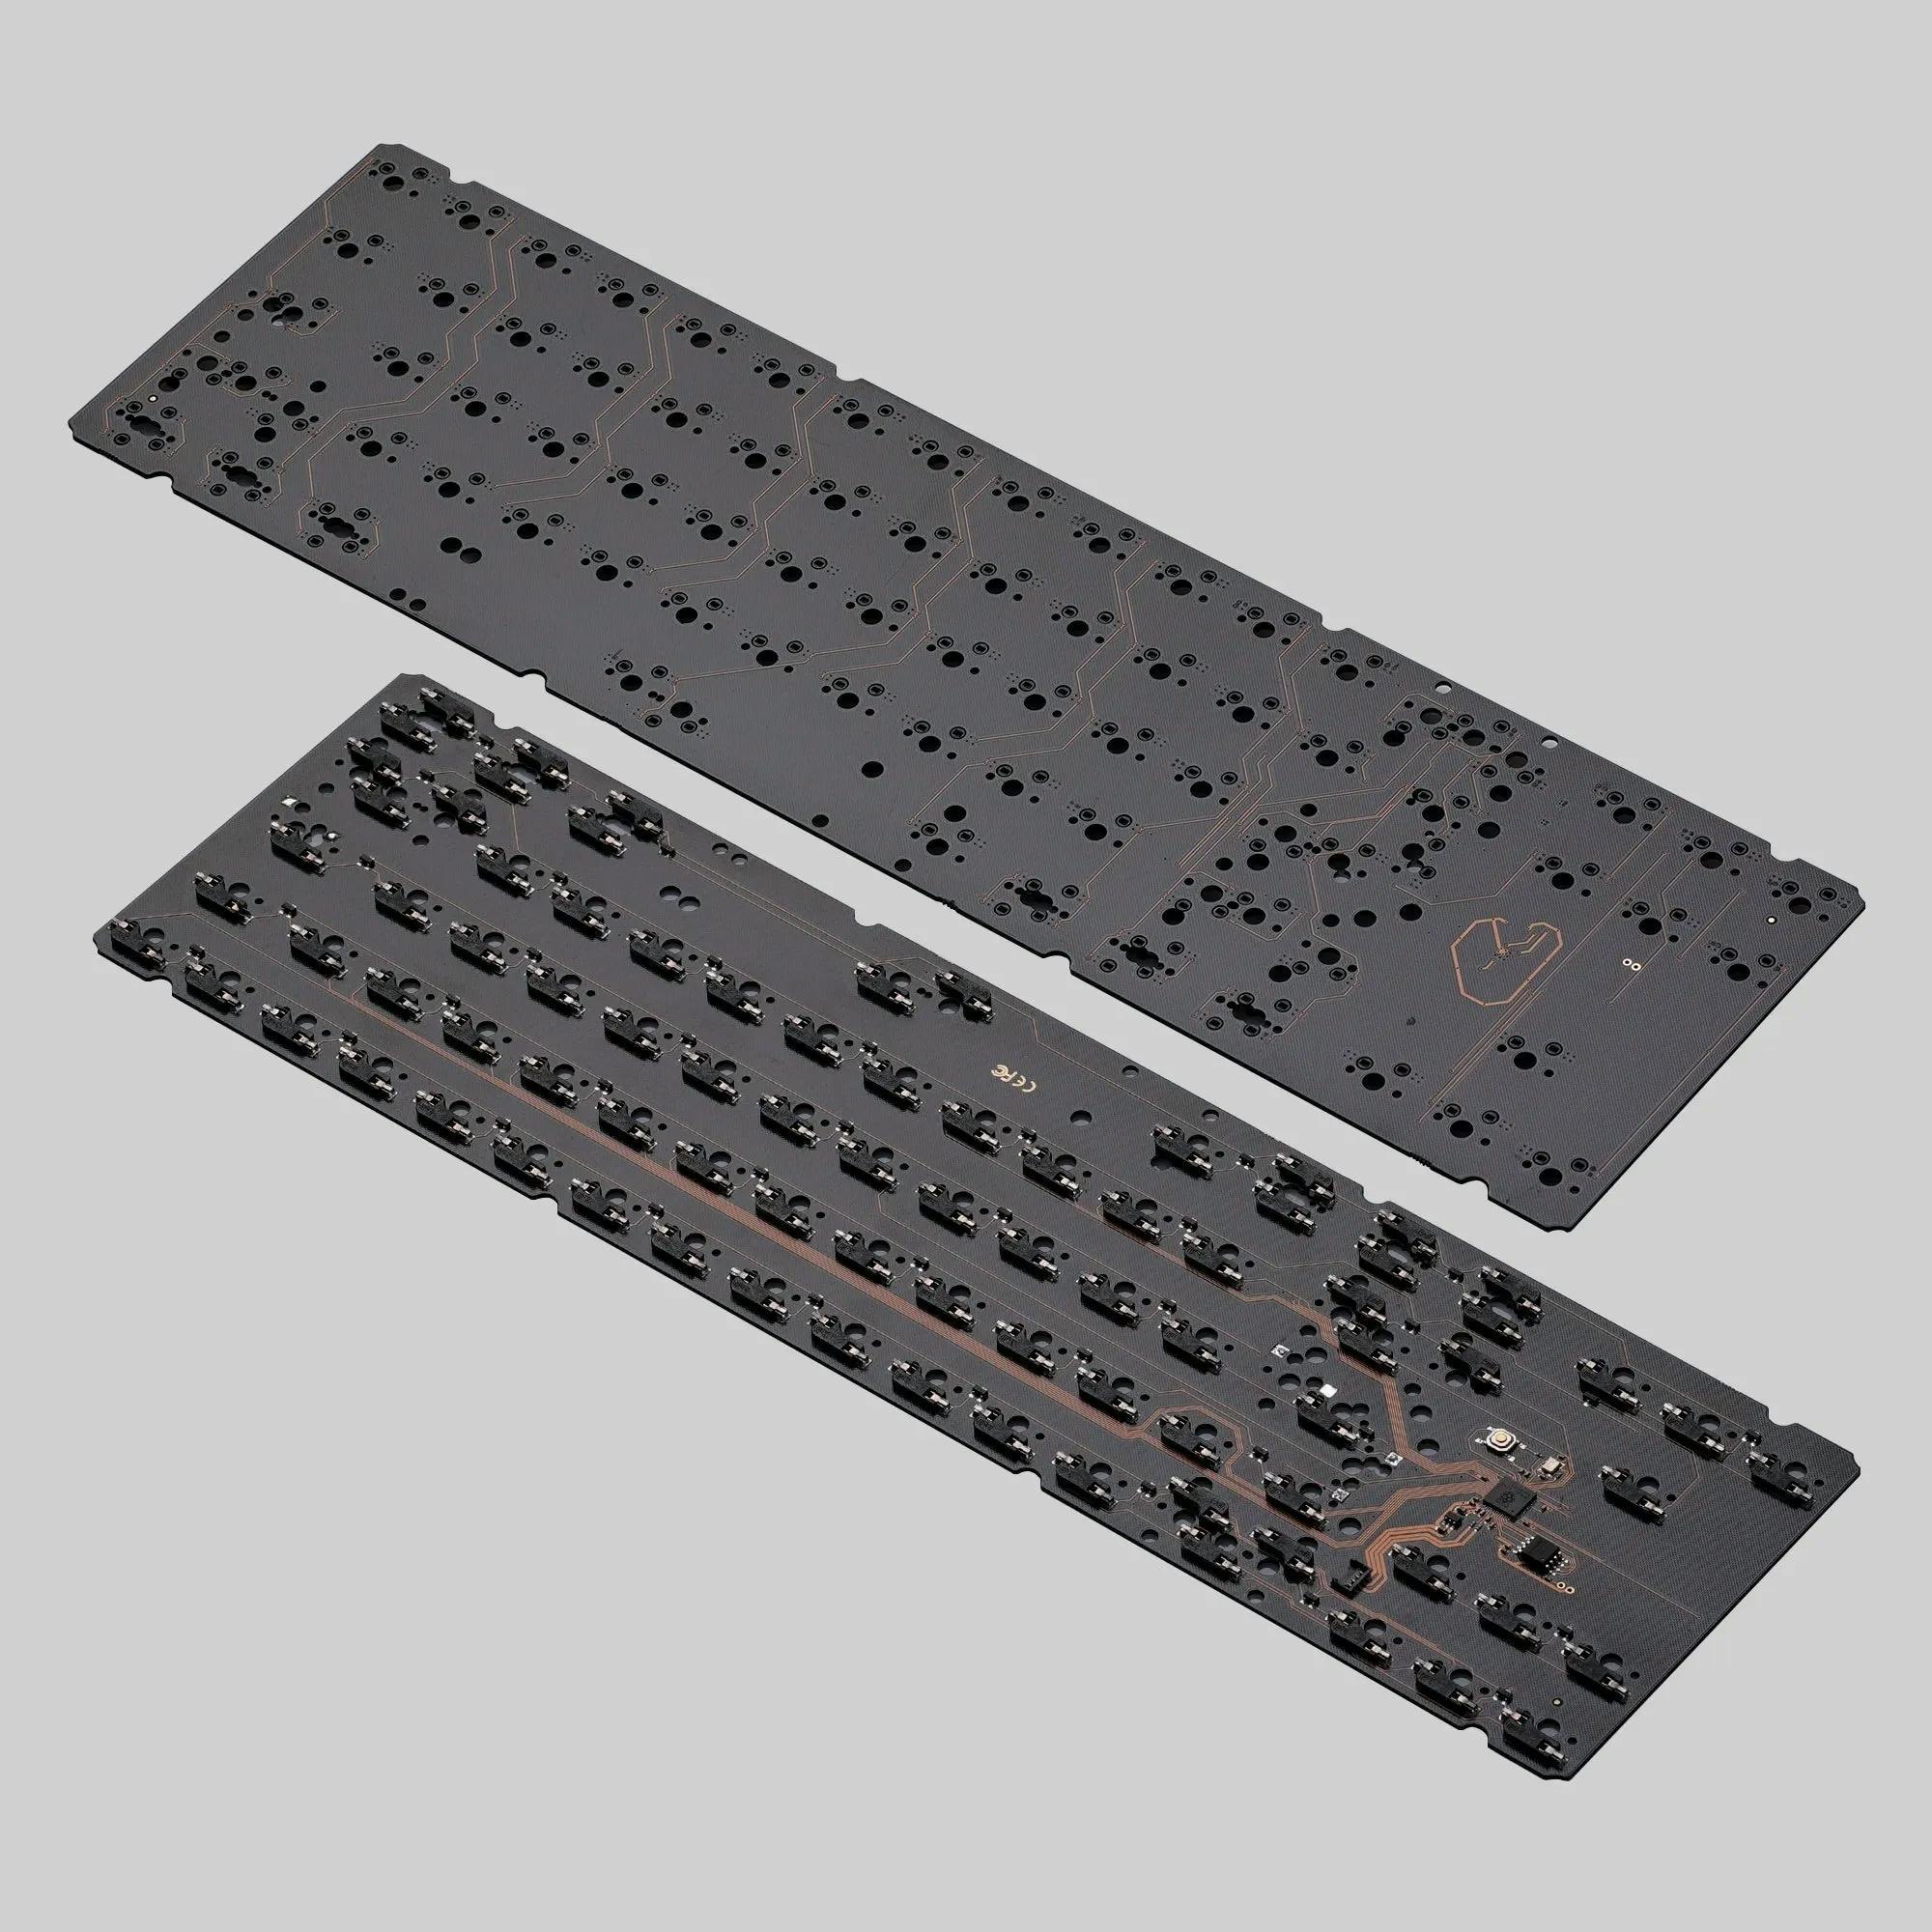 Image for KBDfans Pluto Accessories